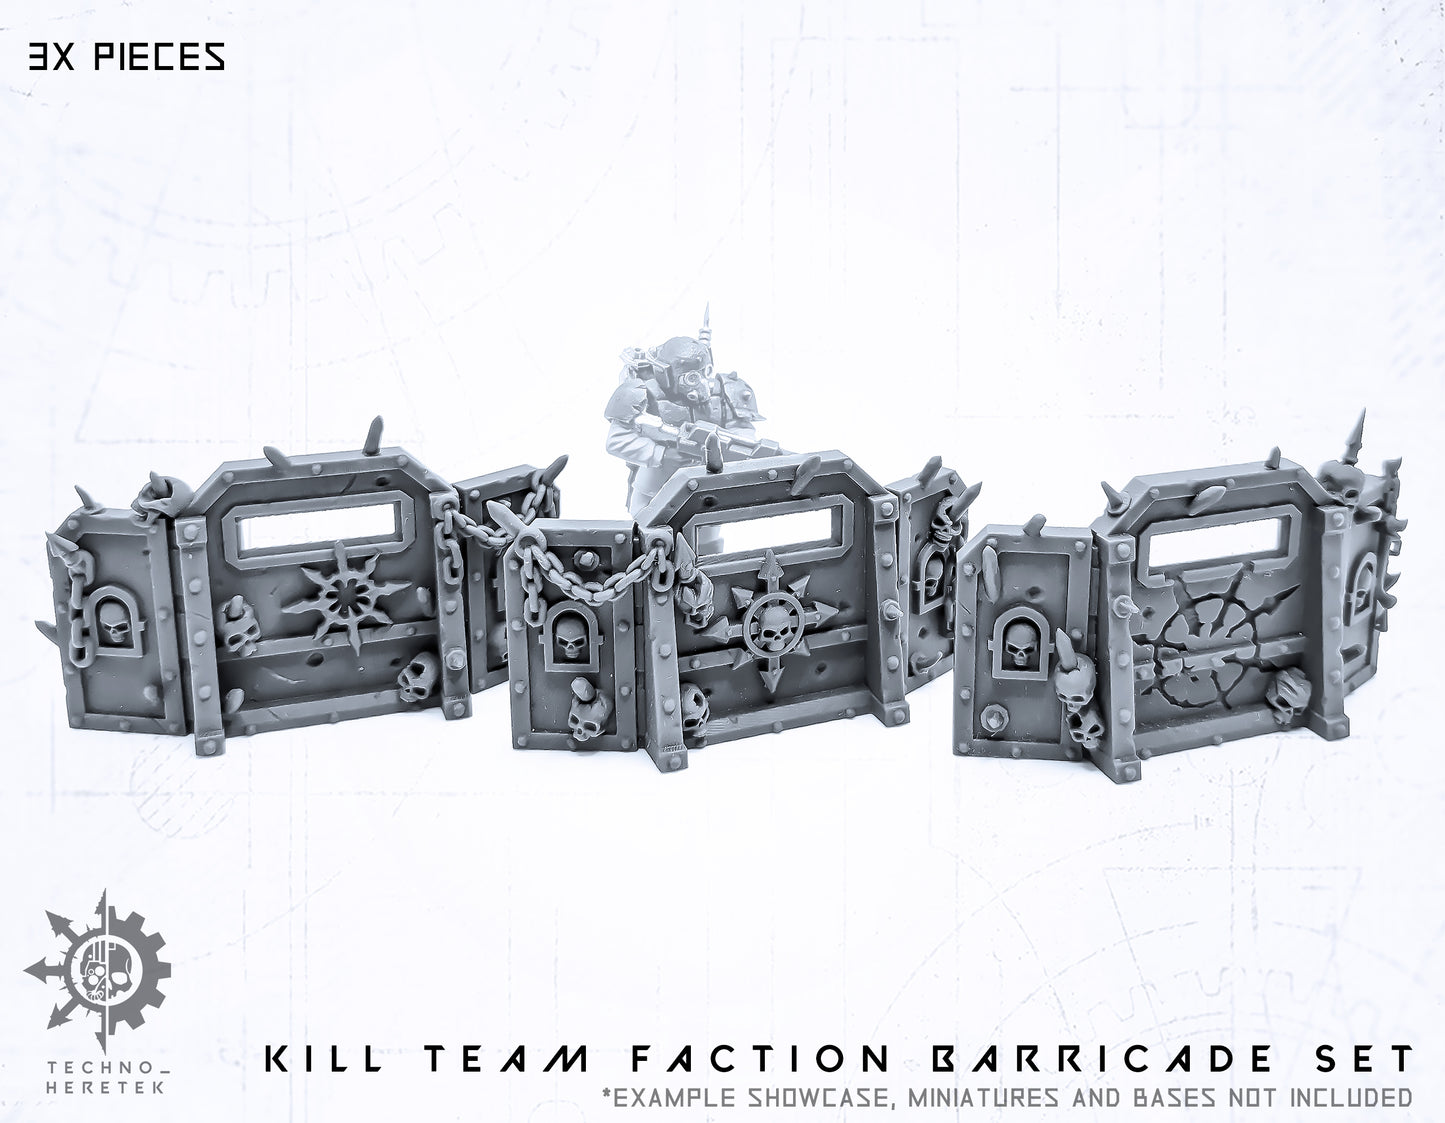 Traitor Guard & Blooded Faction Barricades